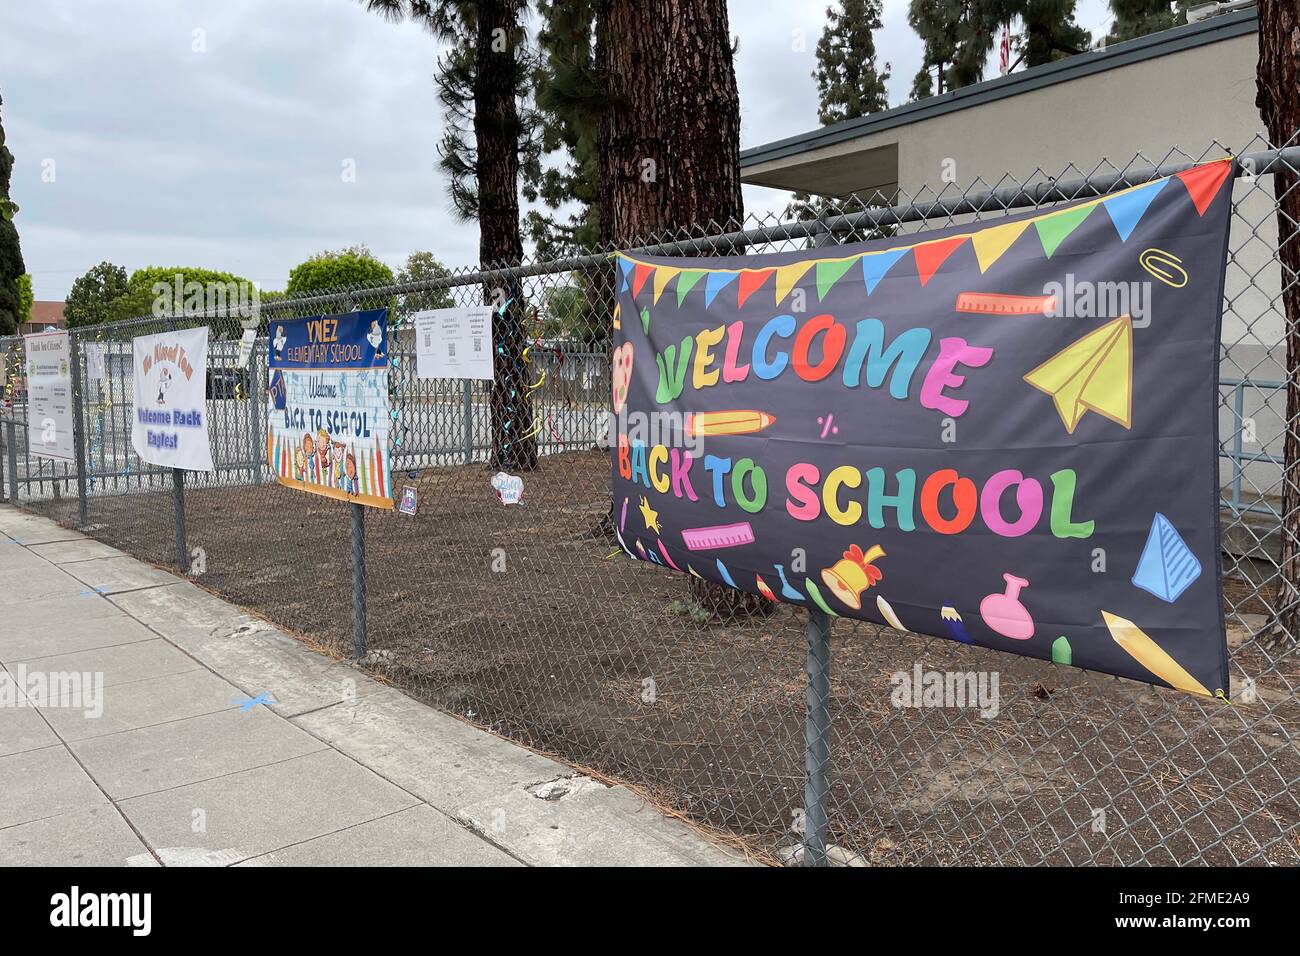 Welcome Back signs at Ynez Elementary School, Saturday, May 8, 2021, in Monterey Park, Calif. Stock Photo